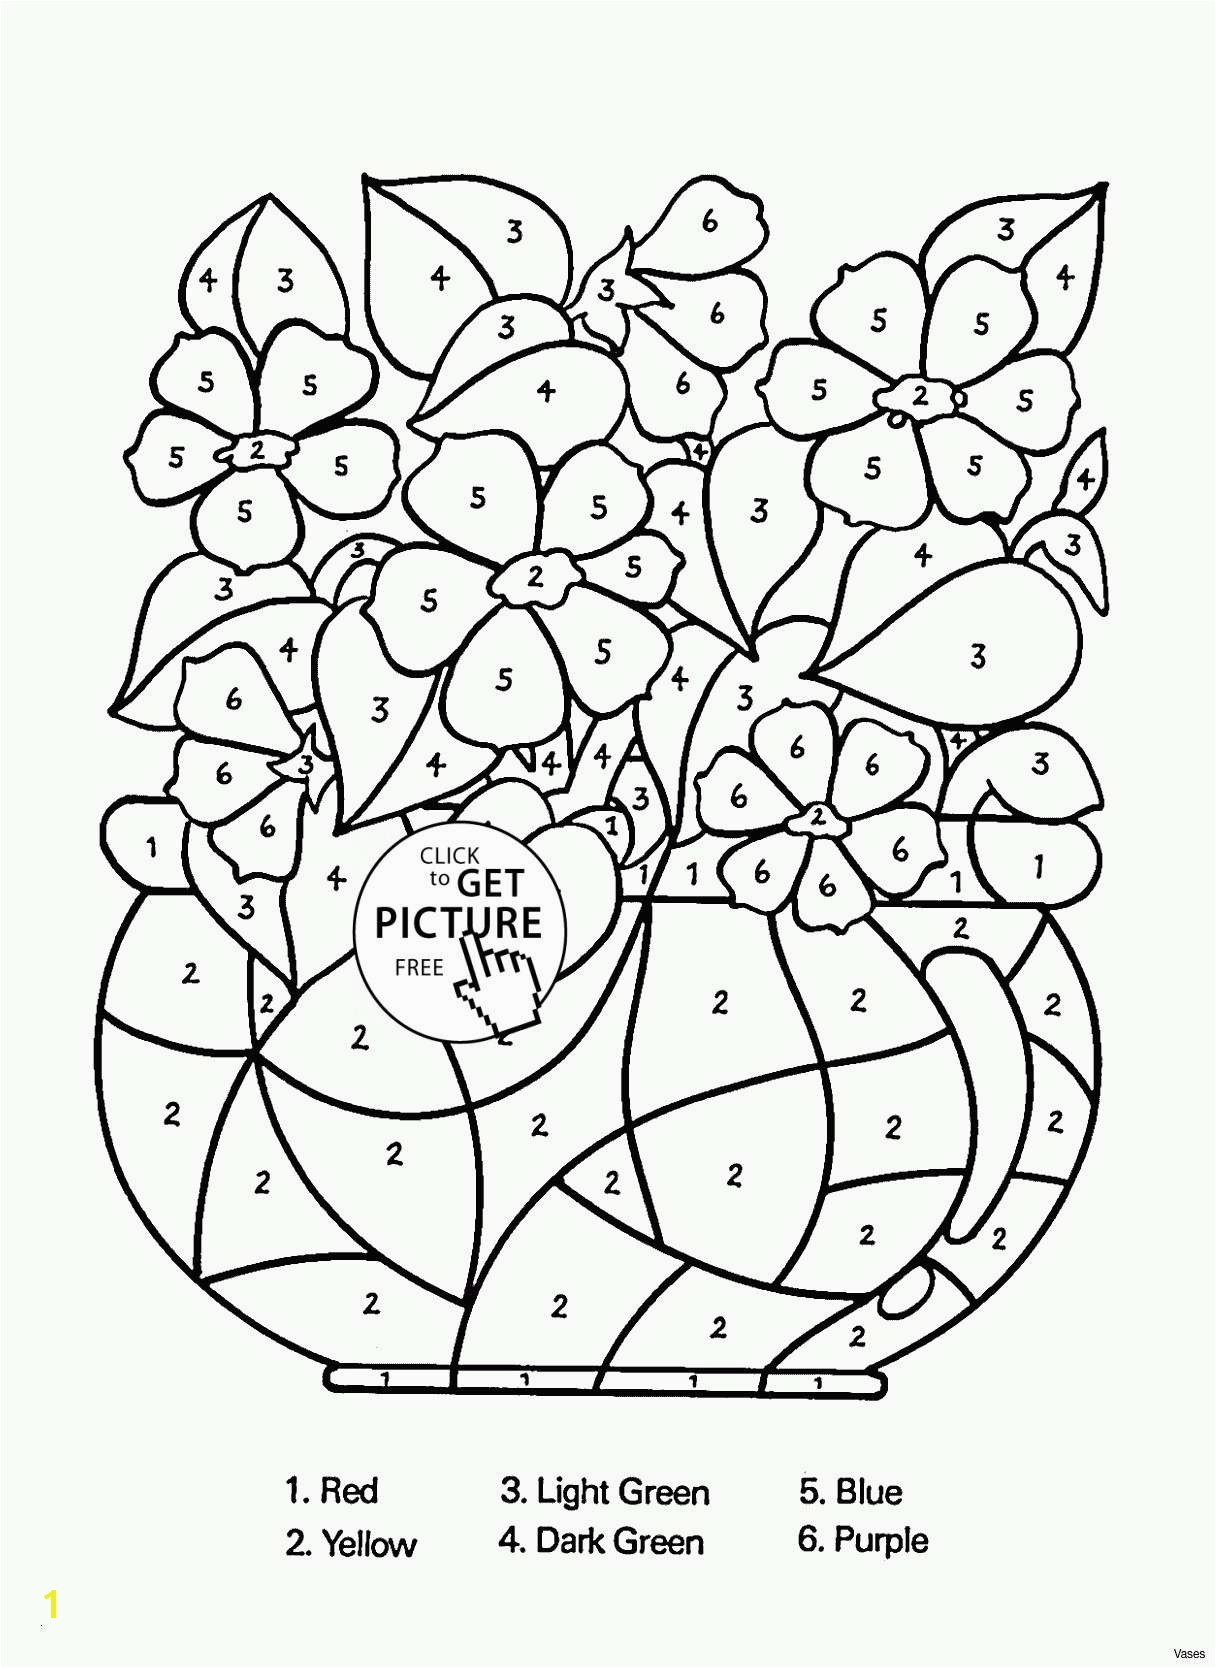 Pesach Coloring Pages Pokemon Coloring Pages for Girls Free Pikachu Coloring Pages Elegant